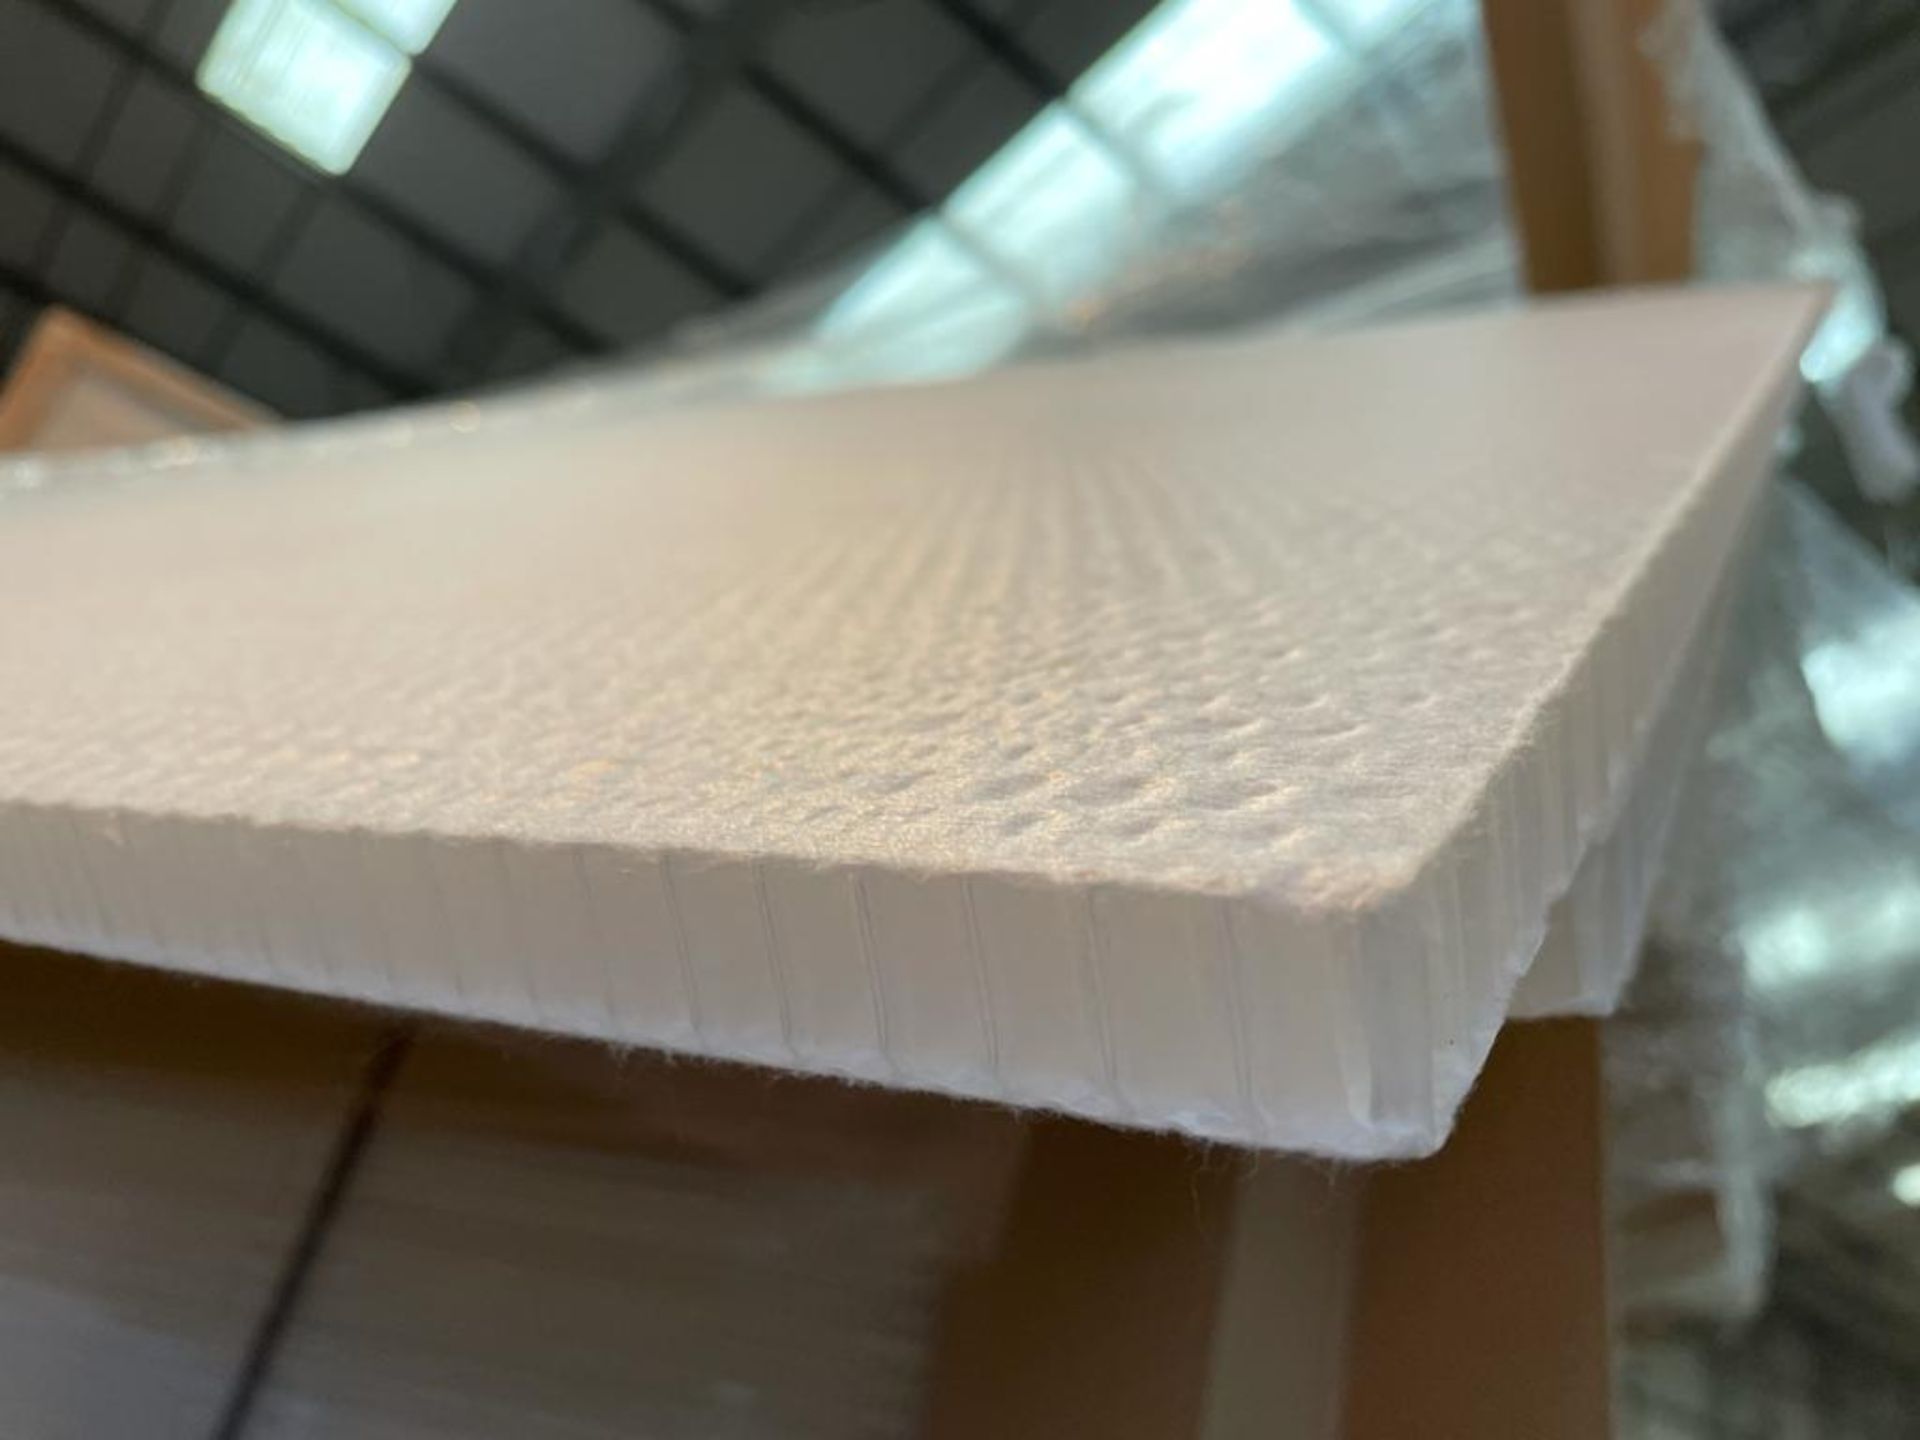 50 x ThermHex Thermoplastic Honeycomb Core Panels - Size 693 x 1210 x 18mm - New Stock - Lightweight - Image 5 of 8